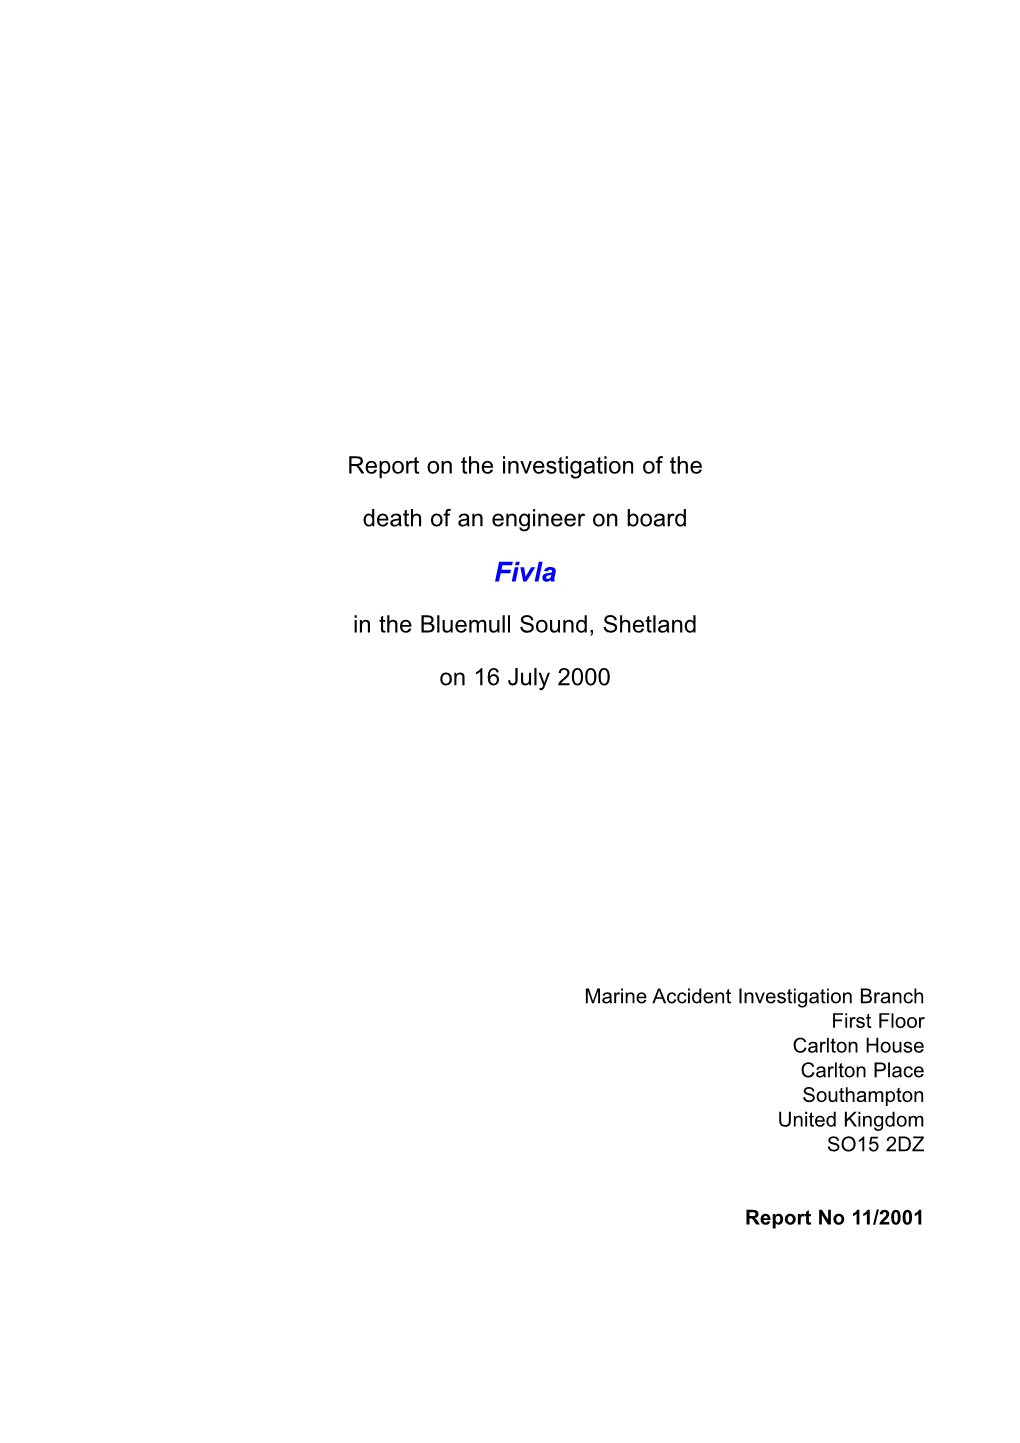 Report on the Investigation of the Death of an Engineer on Board In